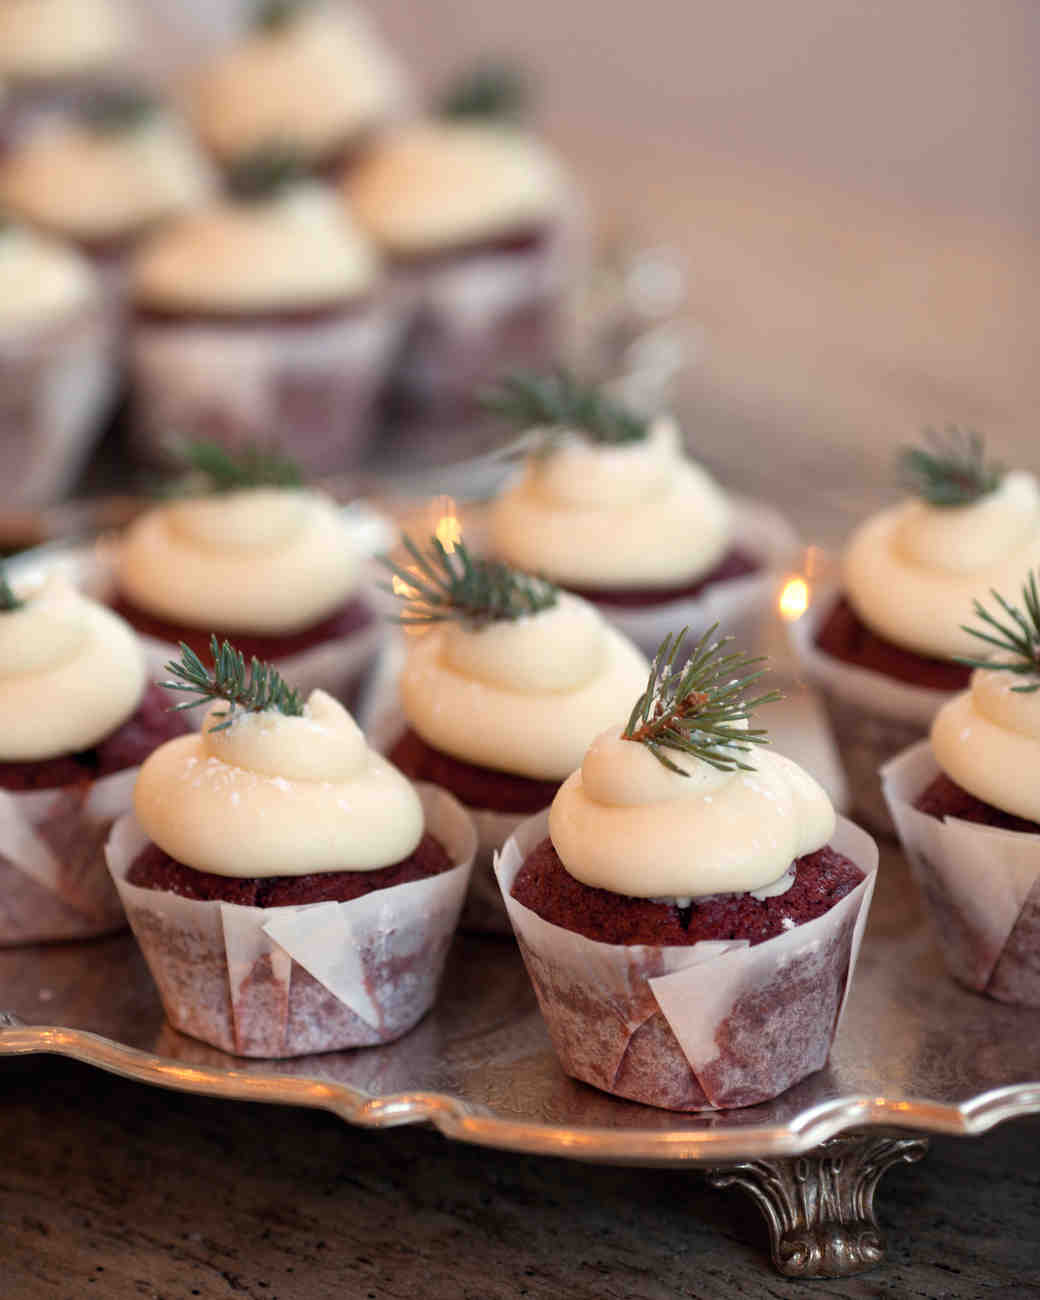 Winter wedding ideas for sweet treats—A tray of cupcakes topped with greenery on a table